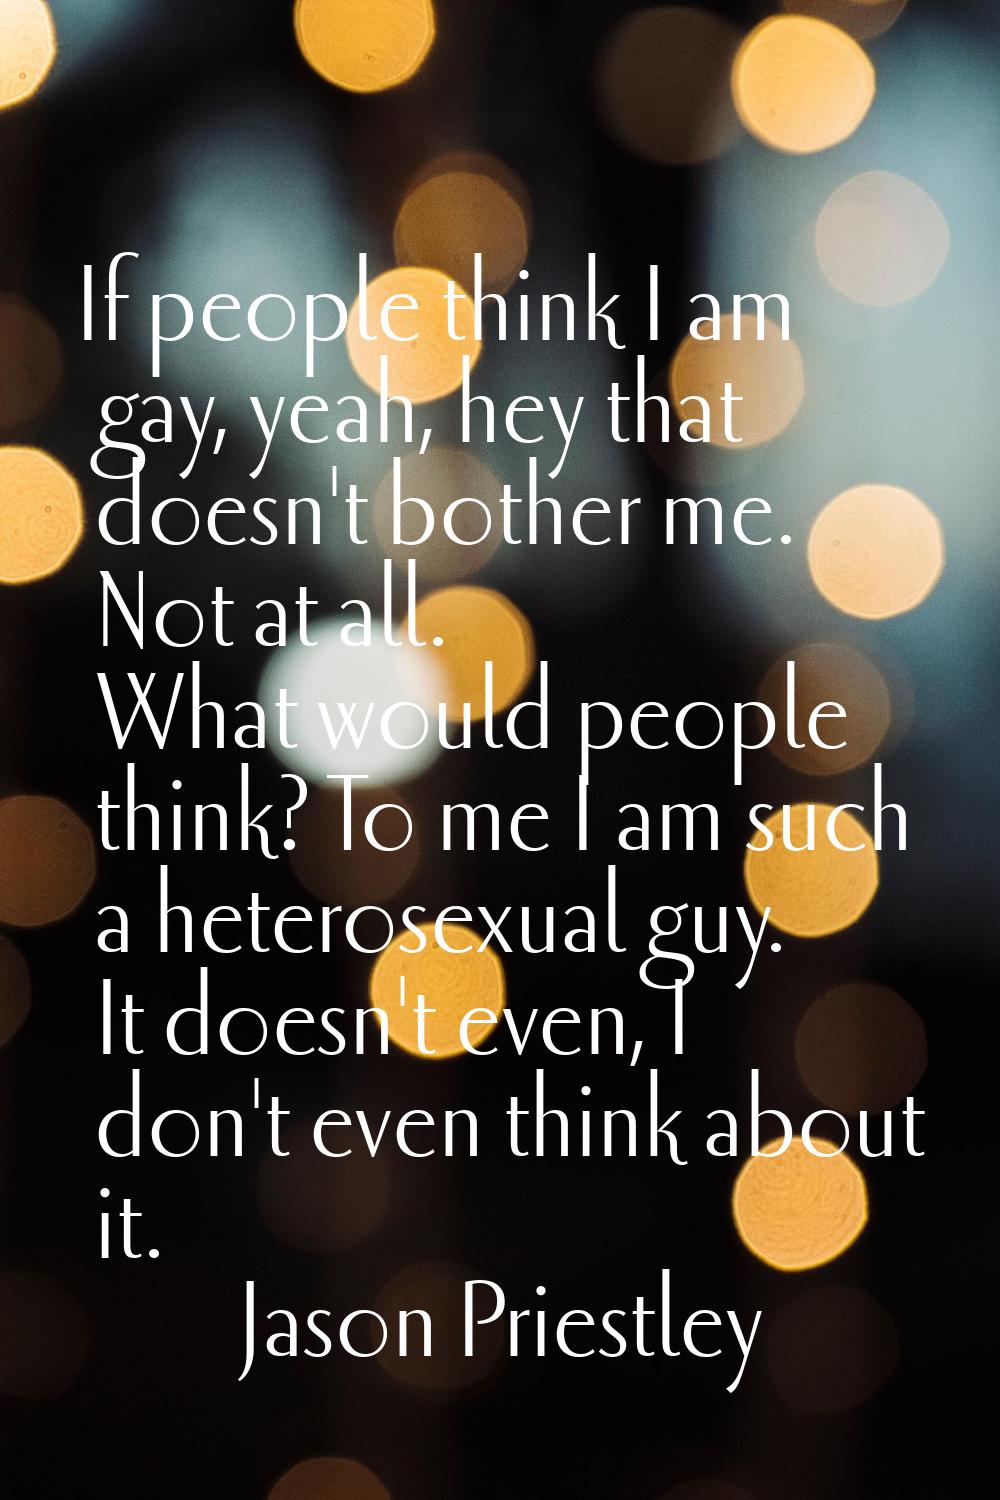 If people think I am gay, yeah, hey that doesn't bother me. Not at all. What would people think? To